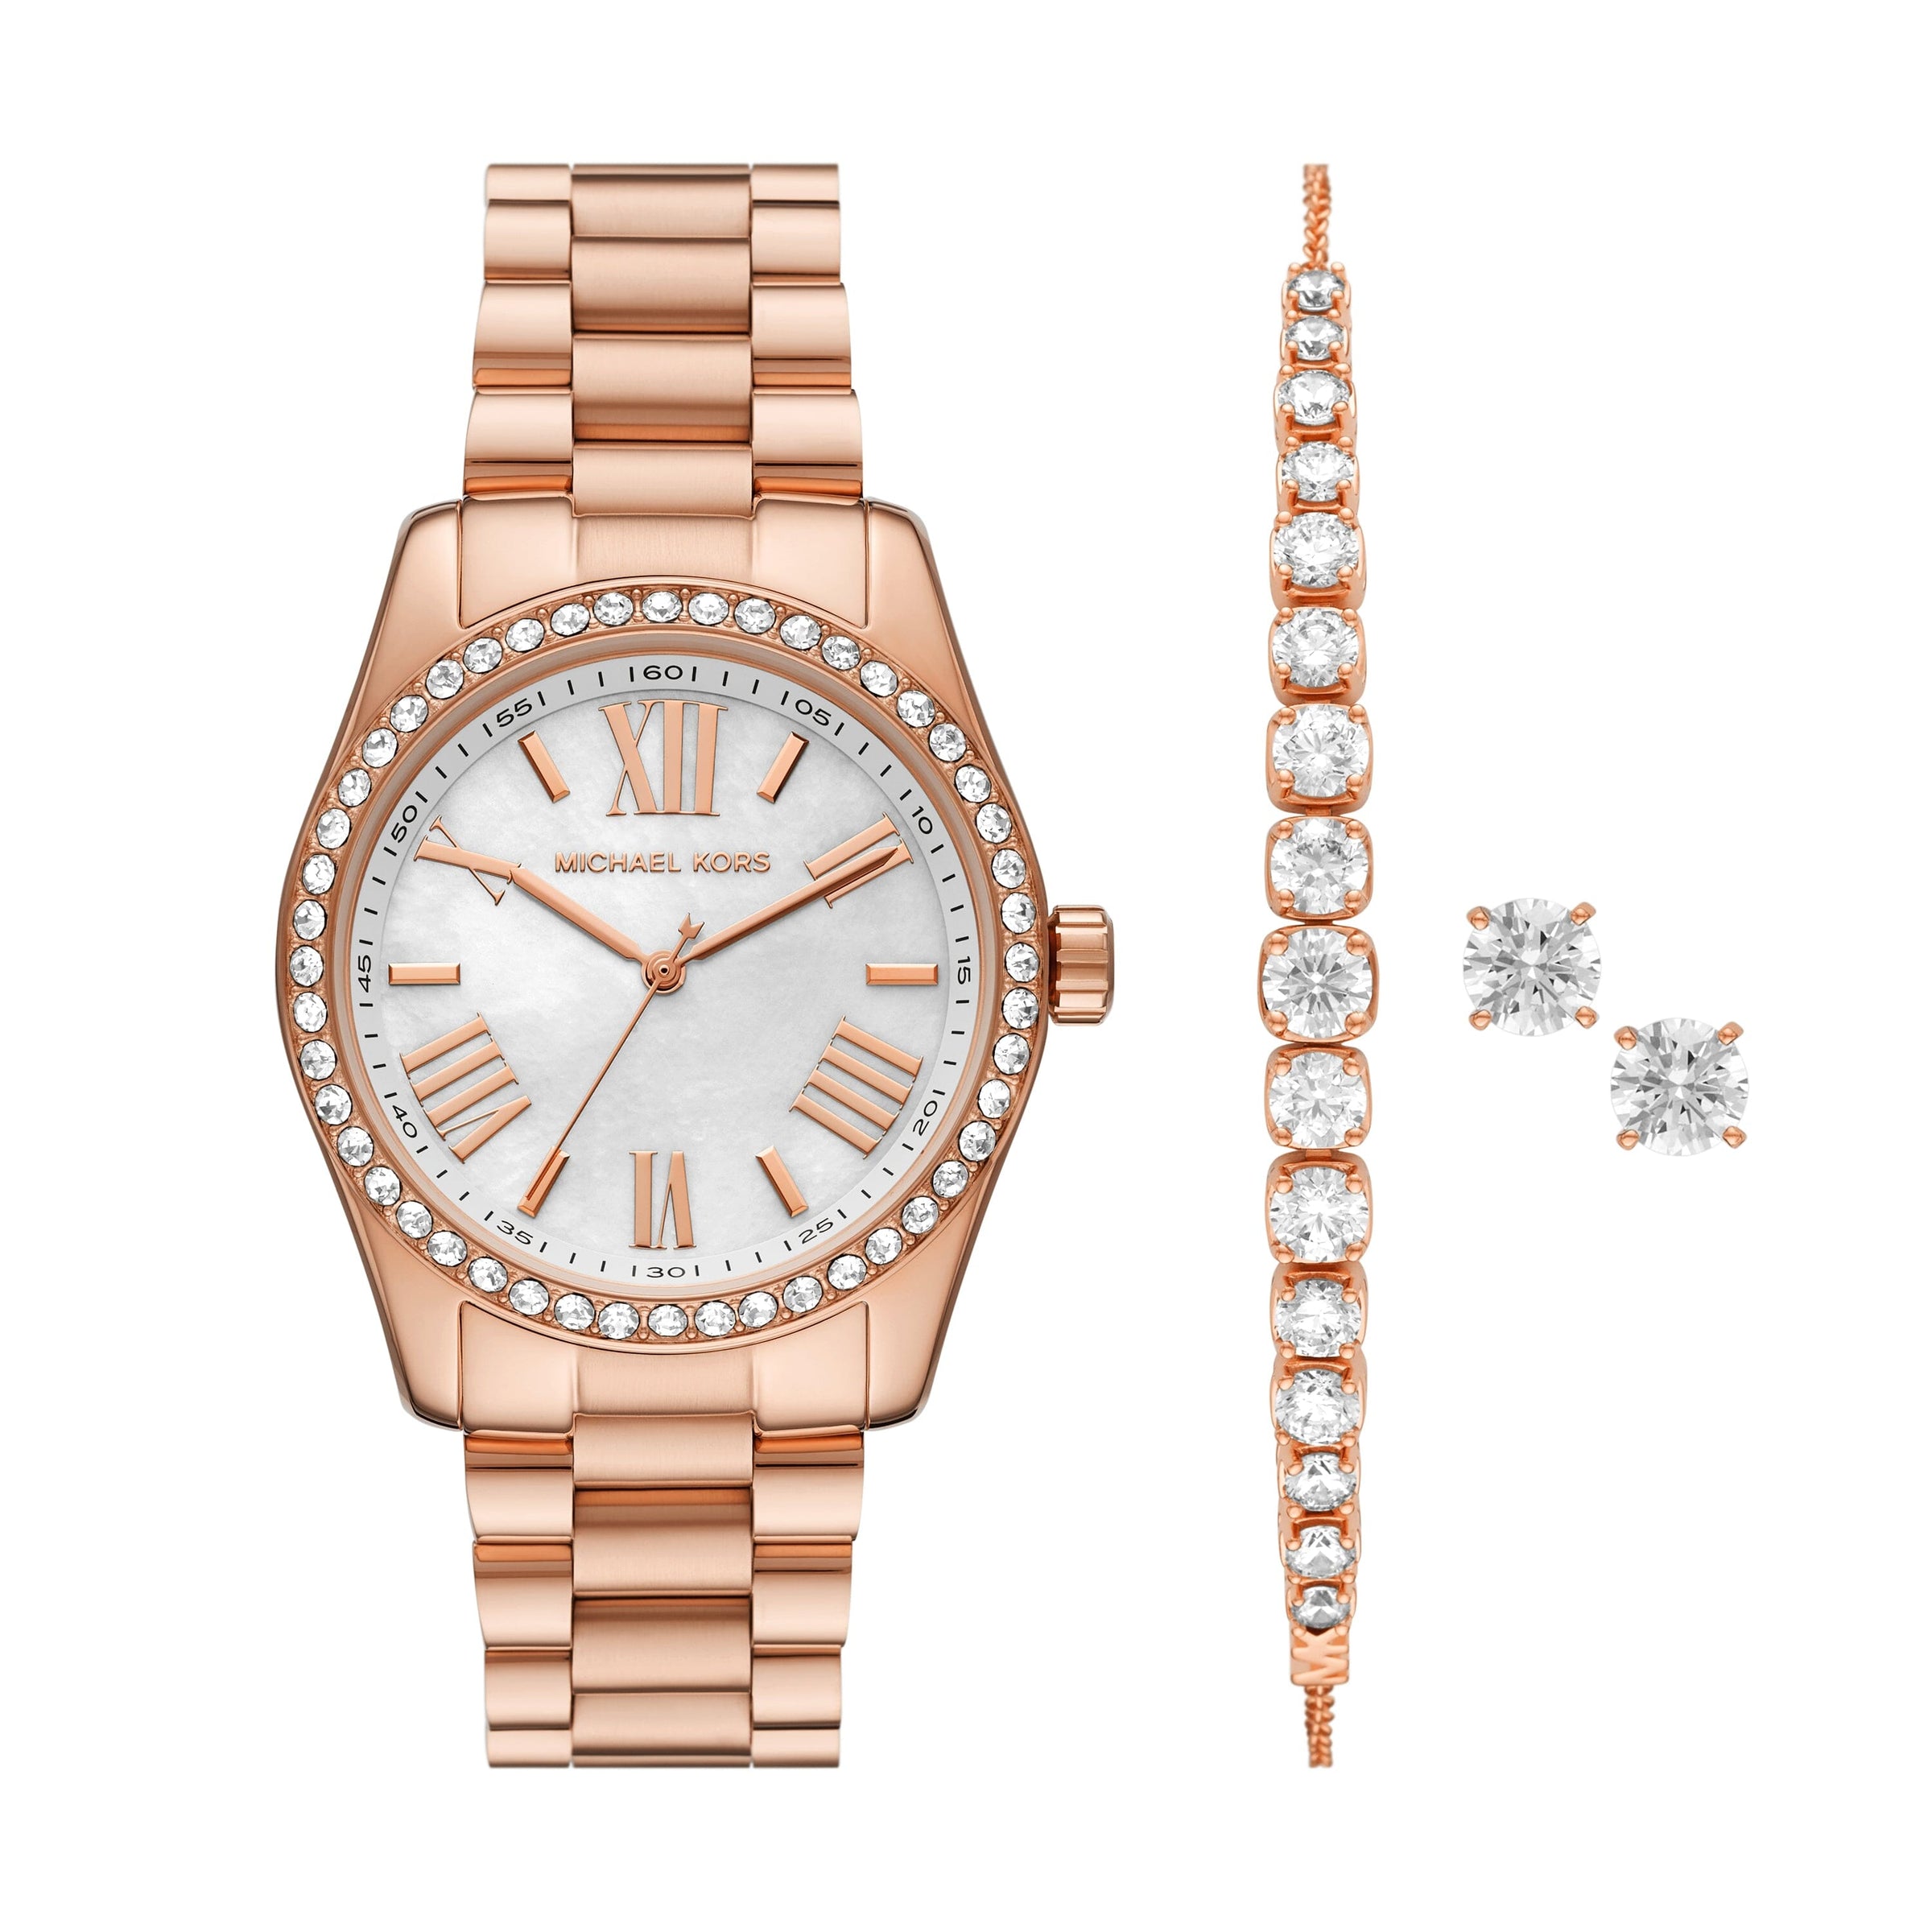 Michael Kors Lexington Three Hand Rose Gold Tone Stainless Steel Watch and Jewelry Gift Set MK1088SET Watches Michael Kors 